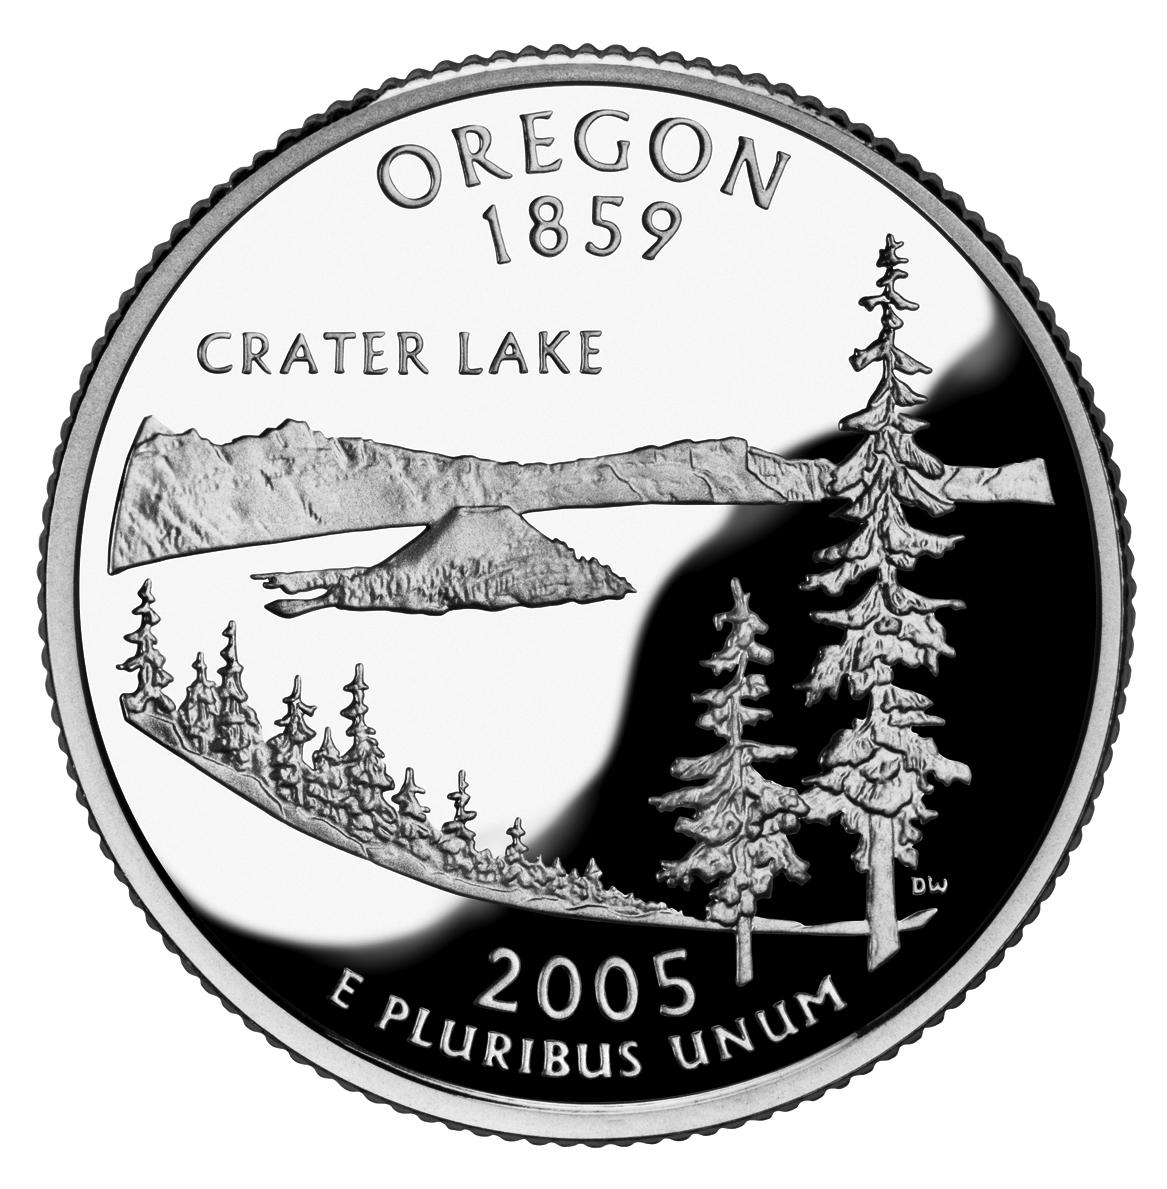 Which Natural Wonder Is Featured On The Commemorative Oregon State Quarter?